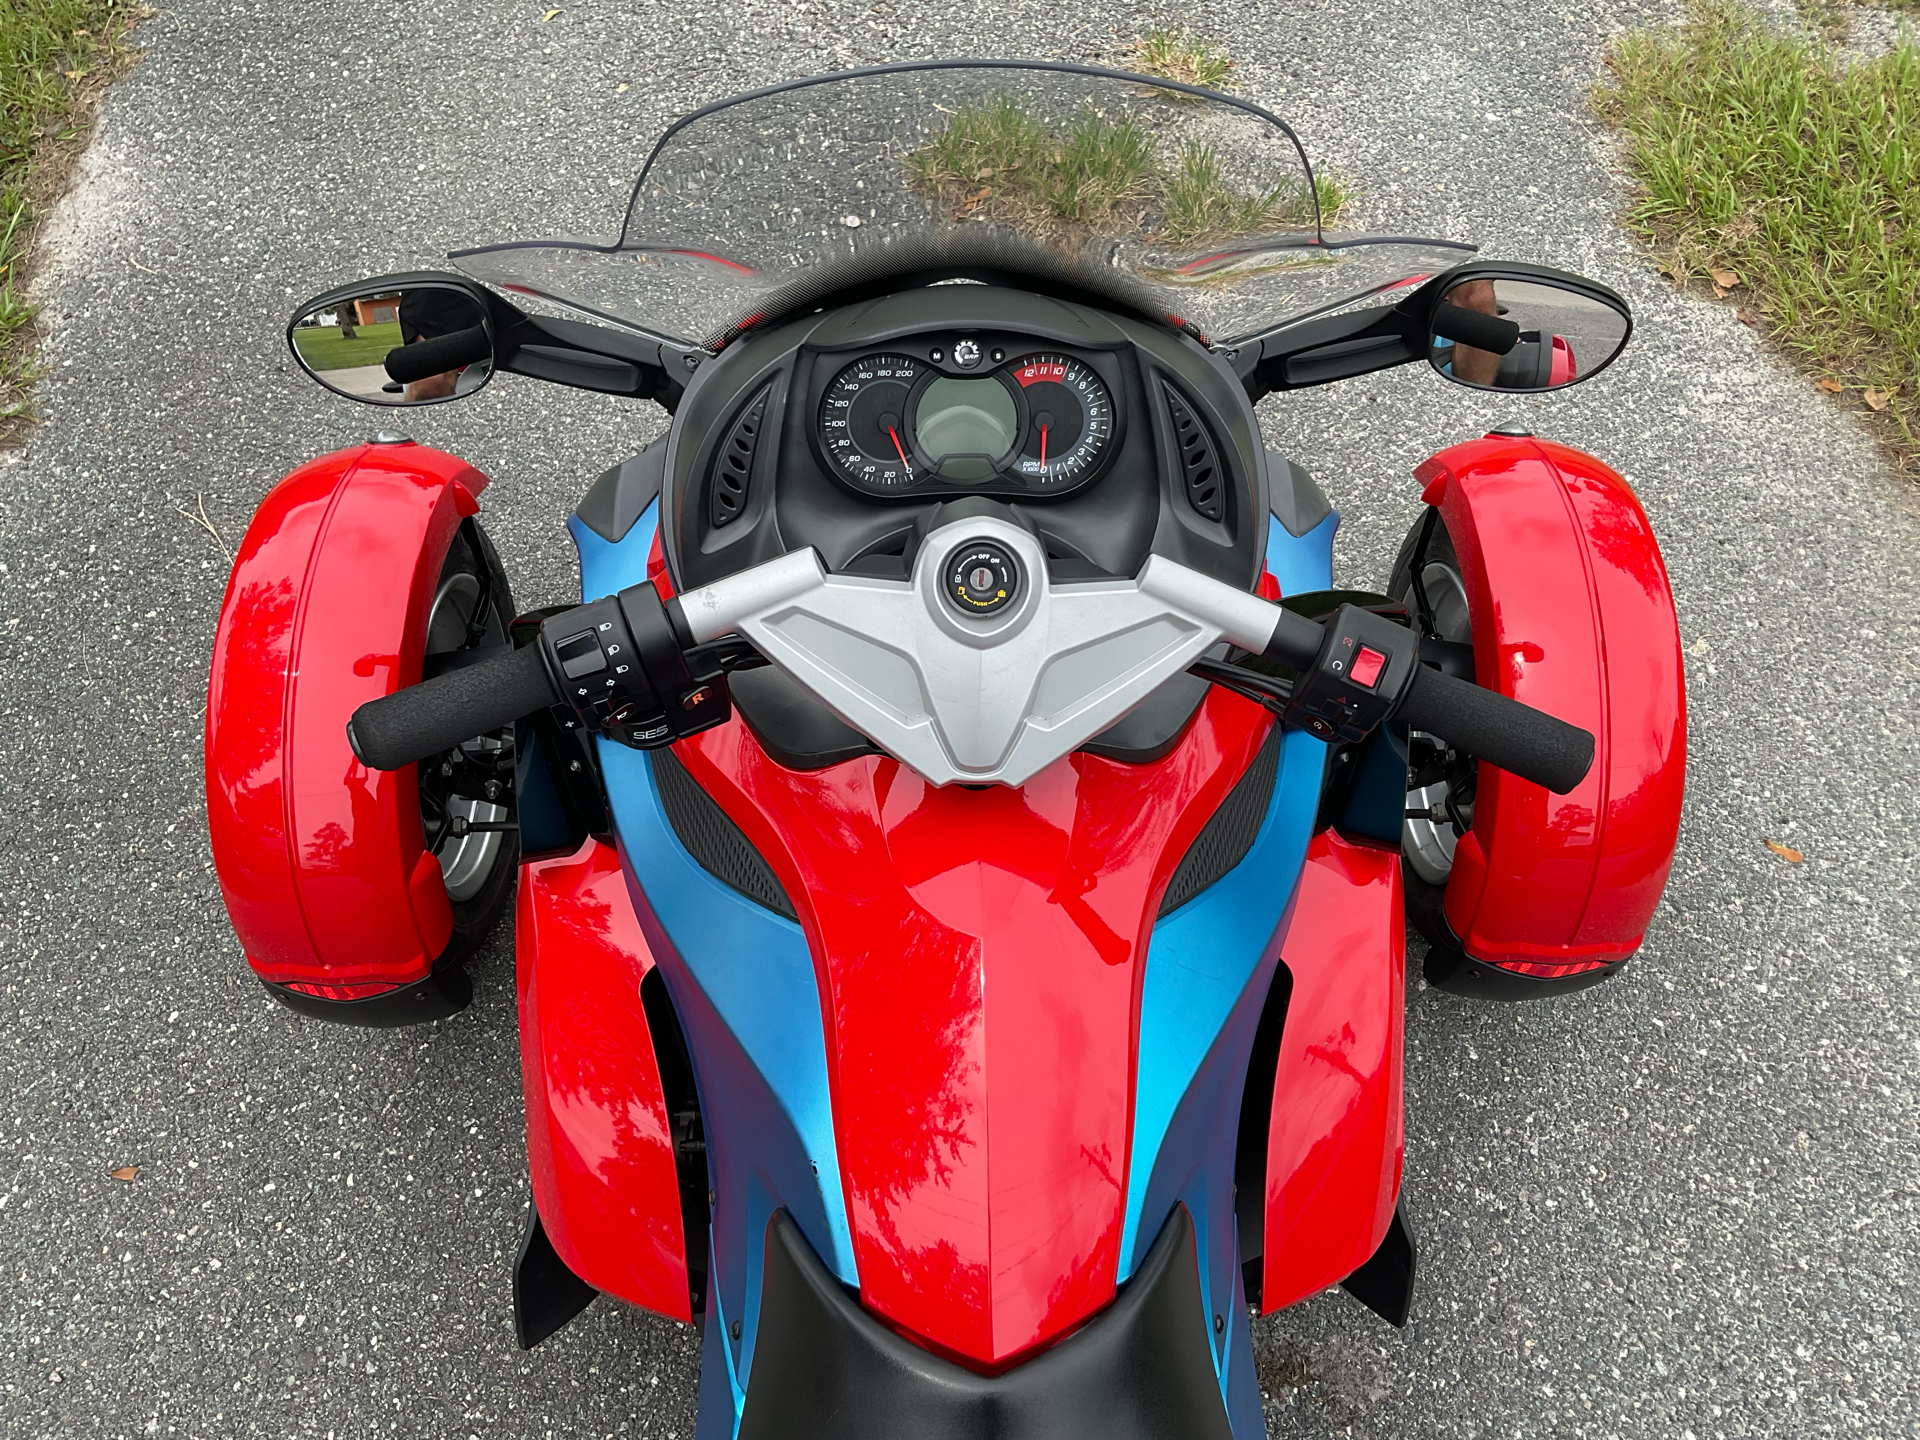 2010 Can-Am Spyder™ RS SE5 in Sanford, Florida - Photo 28